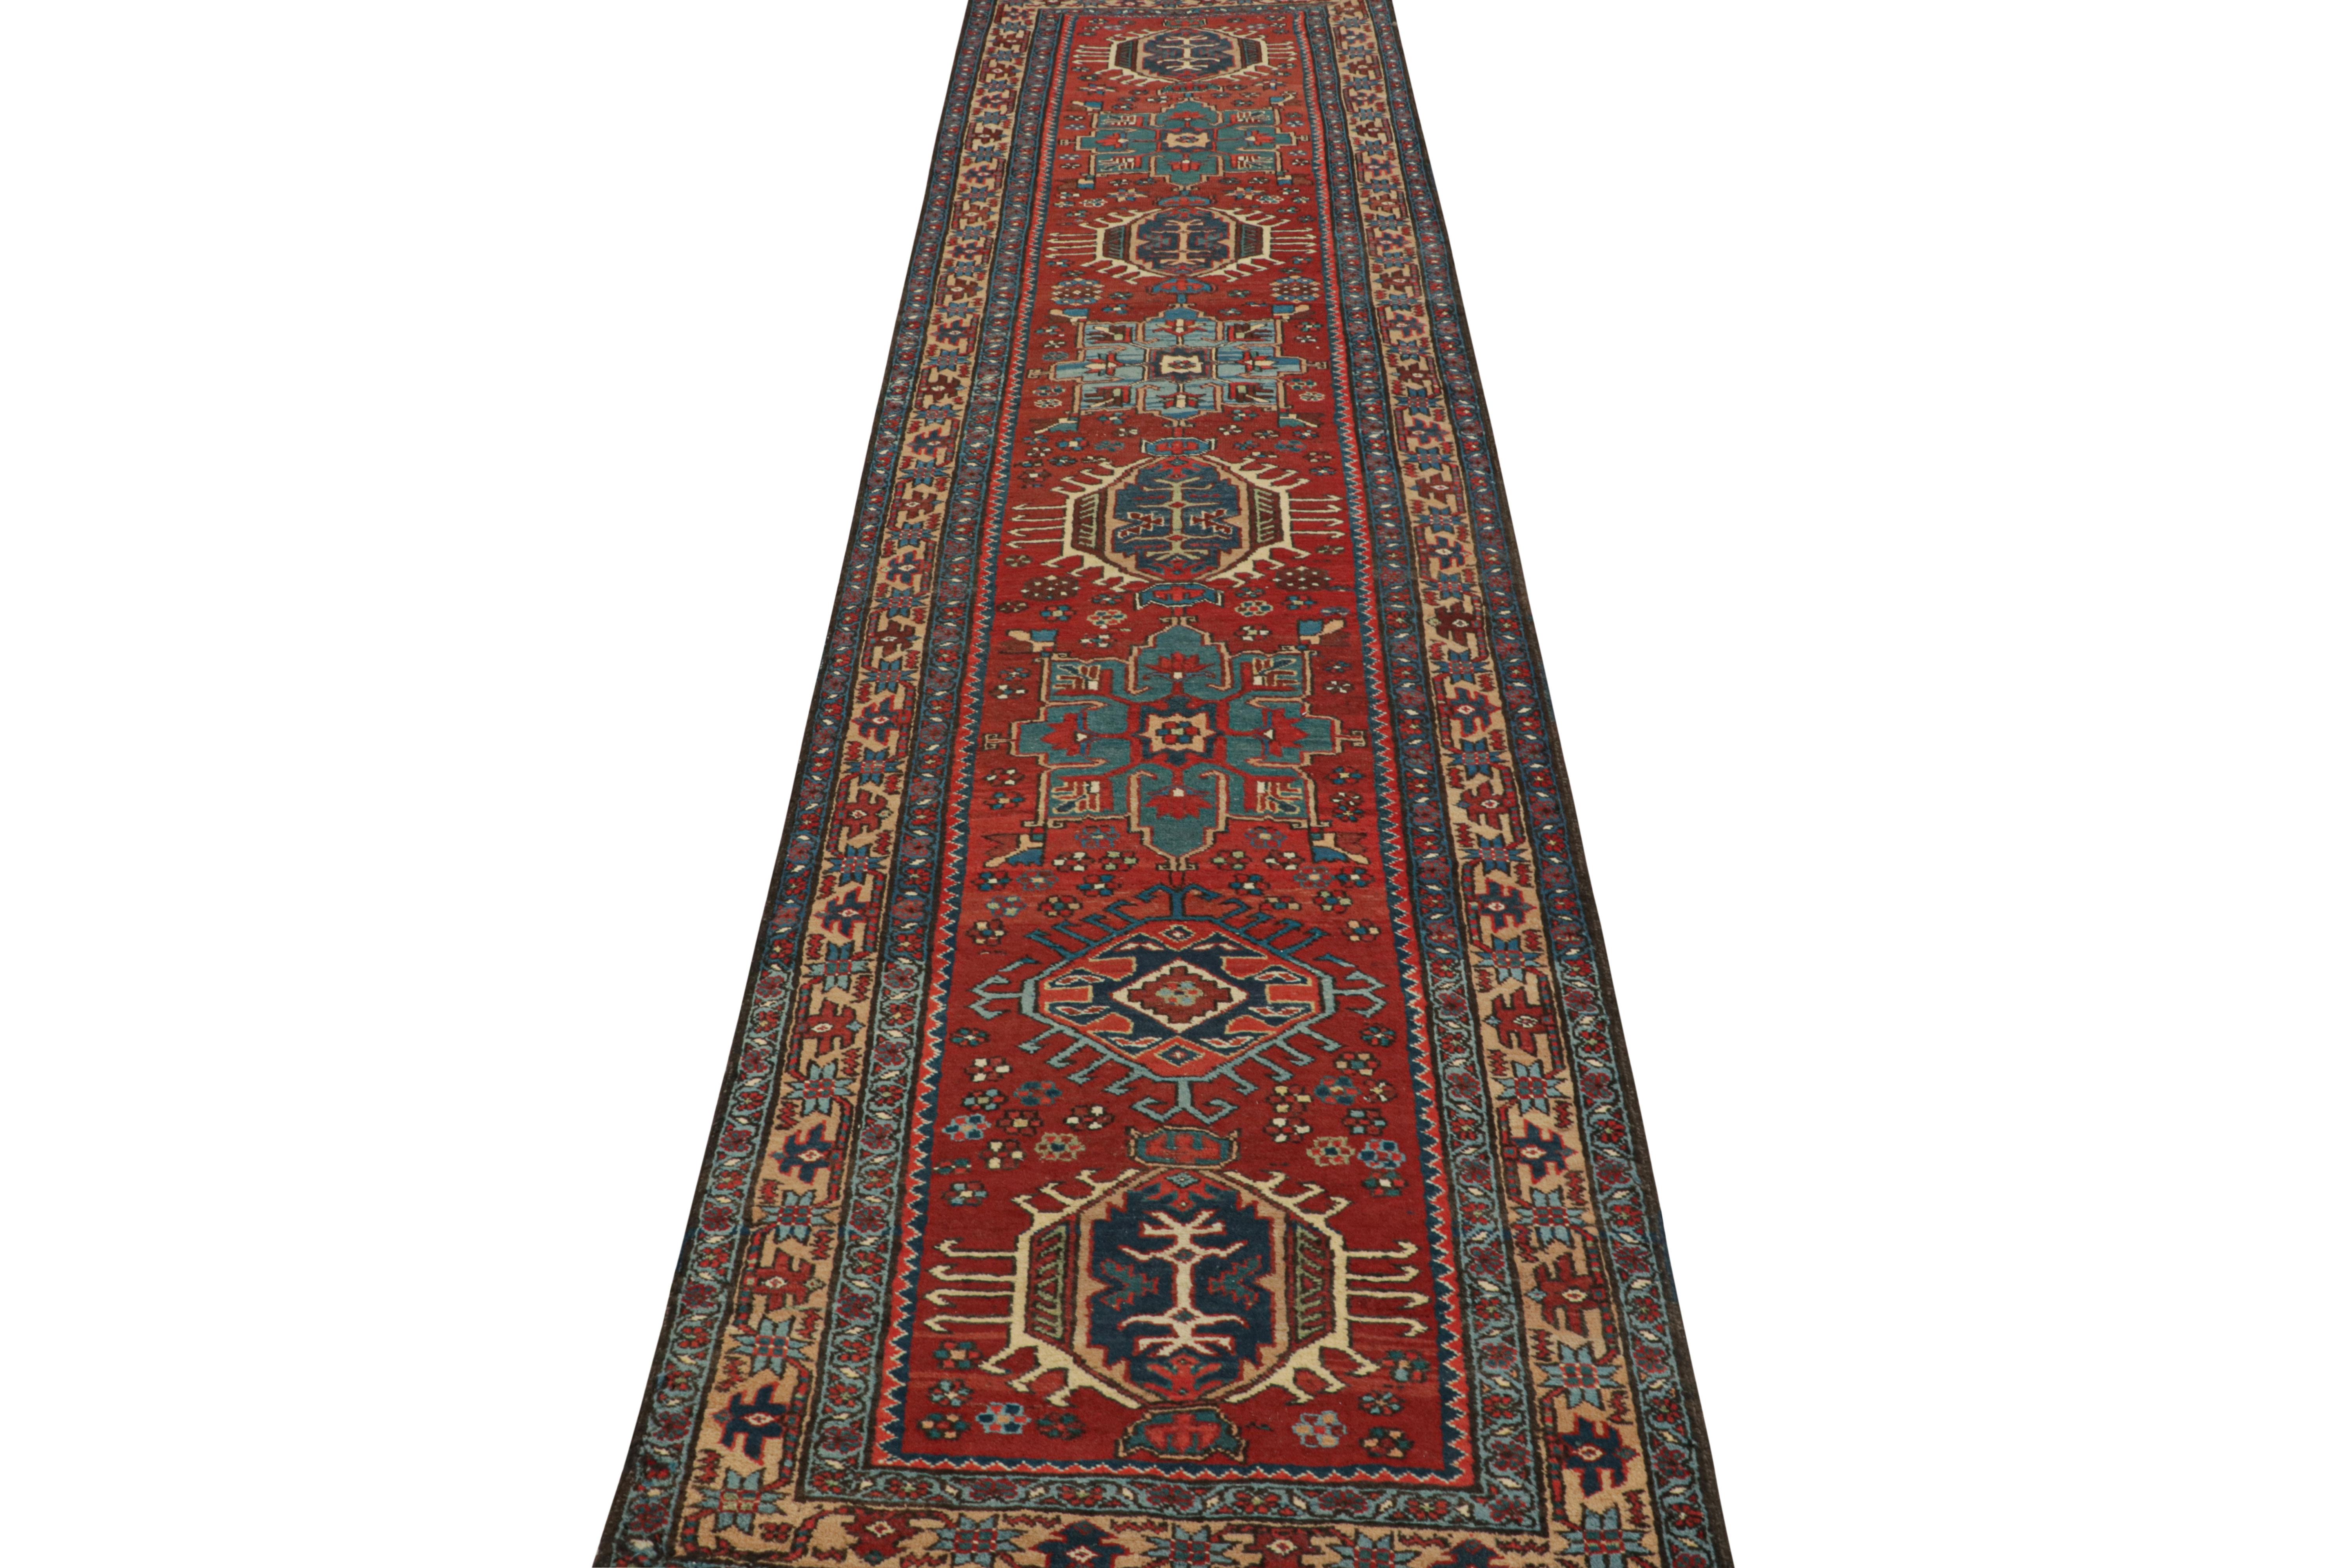 Handmade with wool, this 3x9 runner rug originates from Portugal circa 1920-1930, via the provenance of the same name—a particularly coveted tradition of needlepoints by women weavers of this nation known by admirers of the craft today 

On the